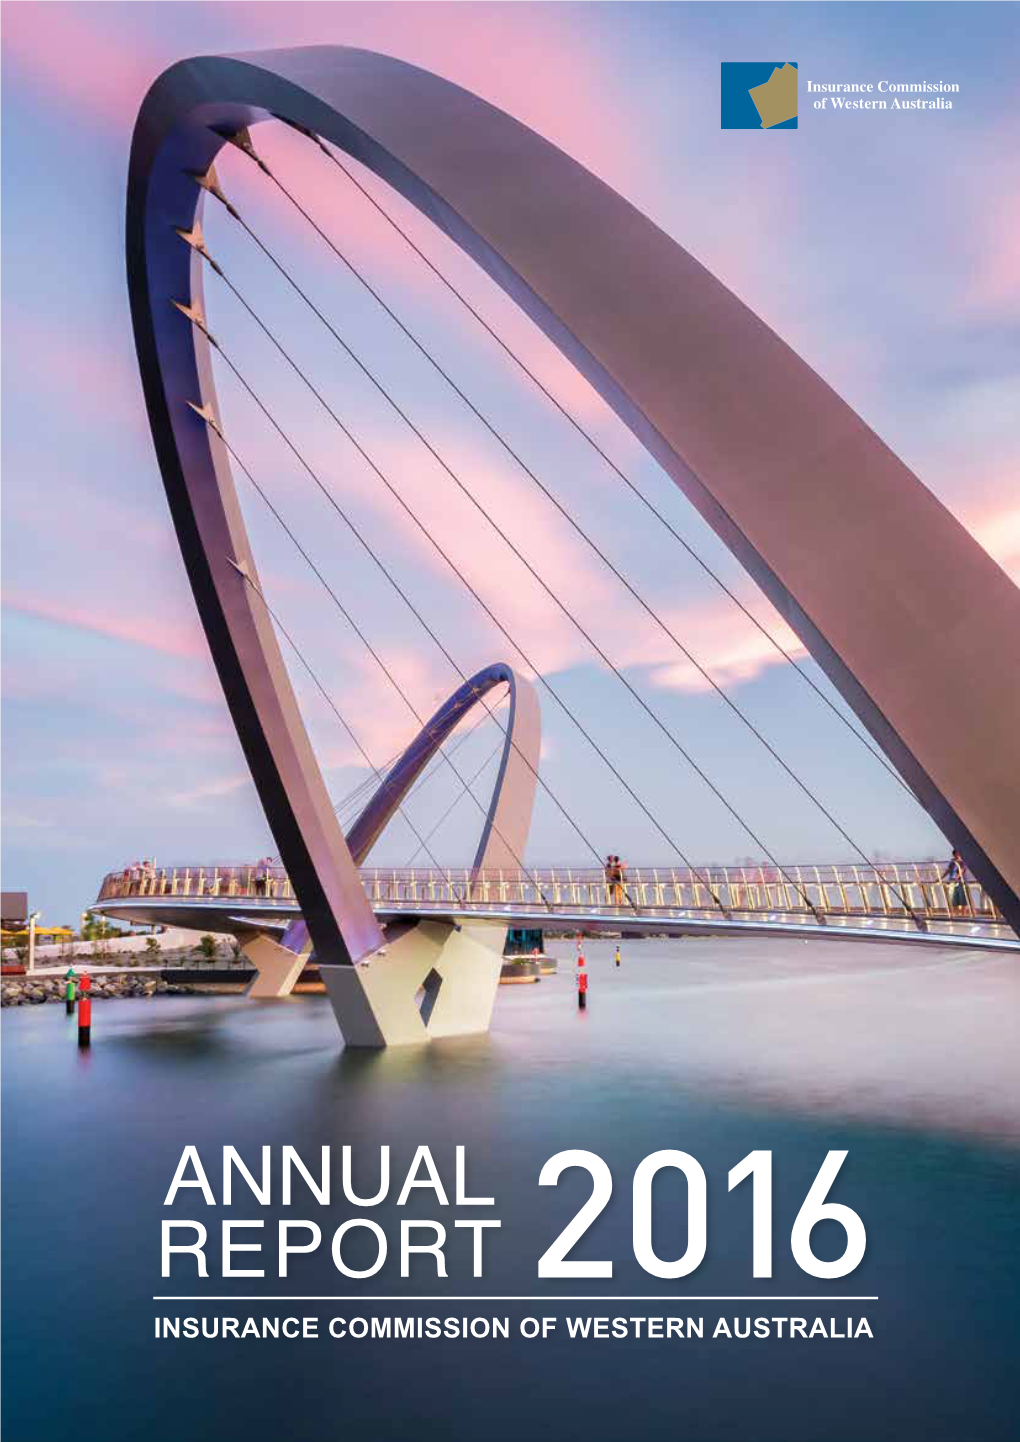 Annual Report 2016 Insurance Commission of Western Australia